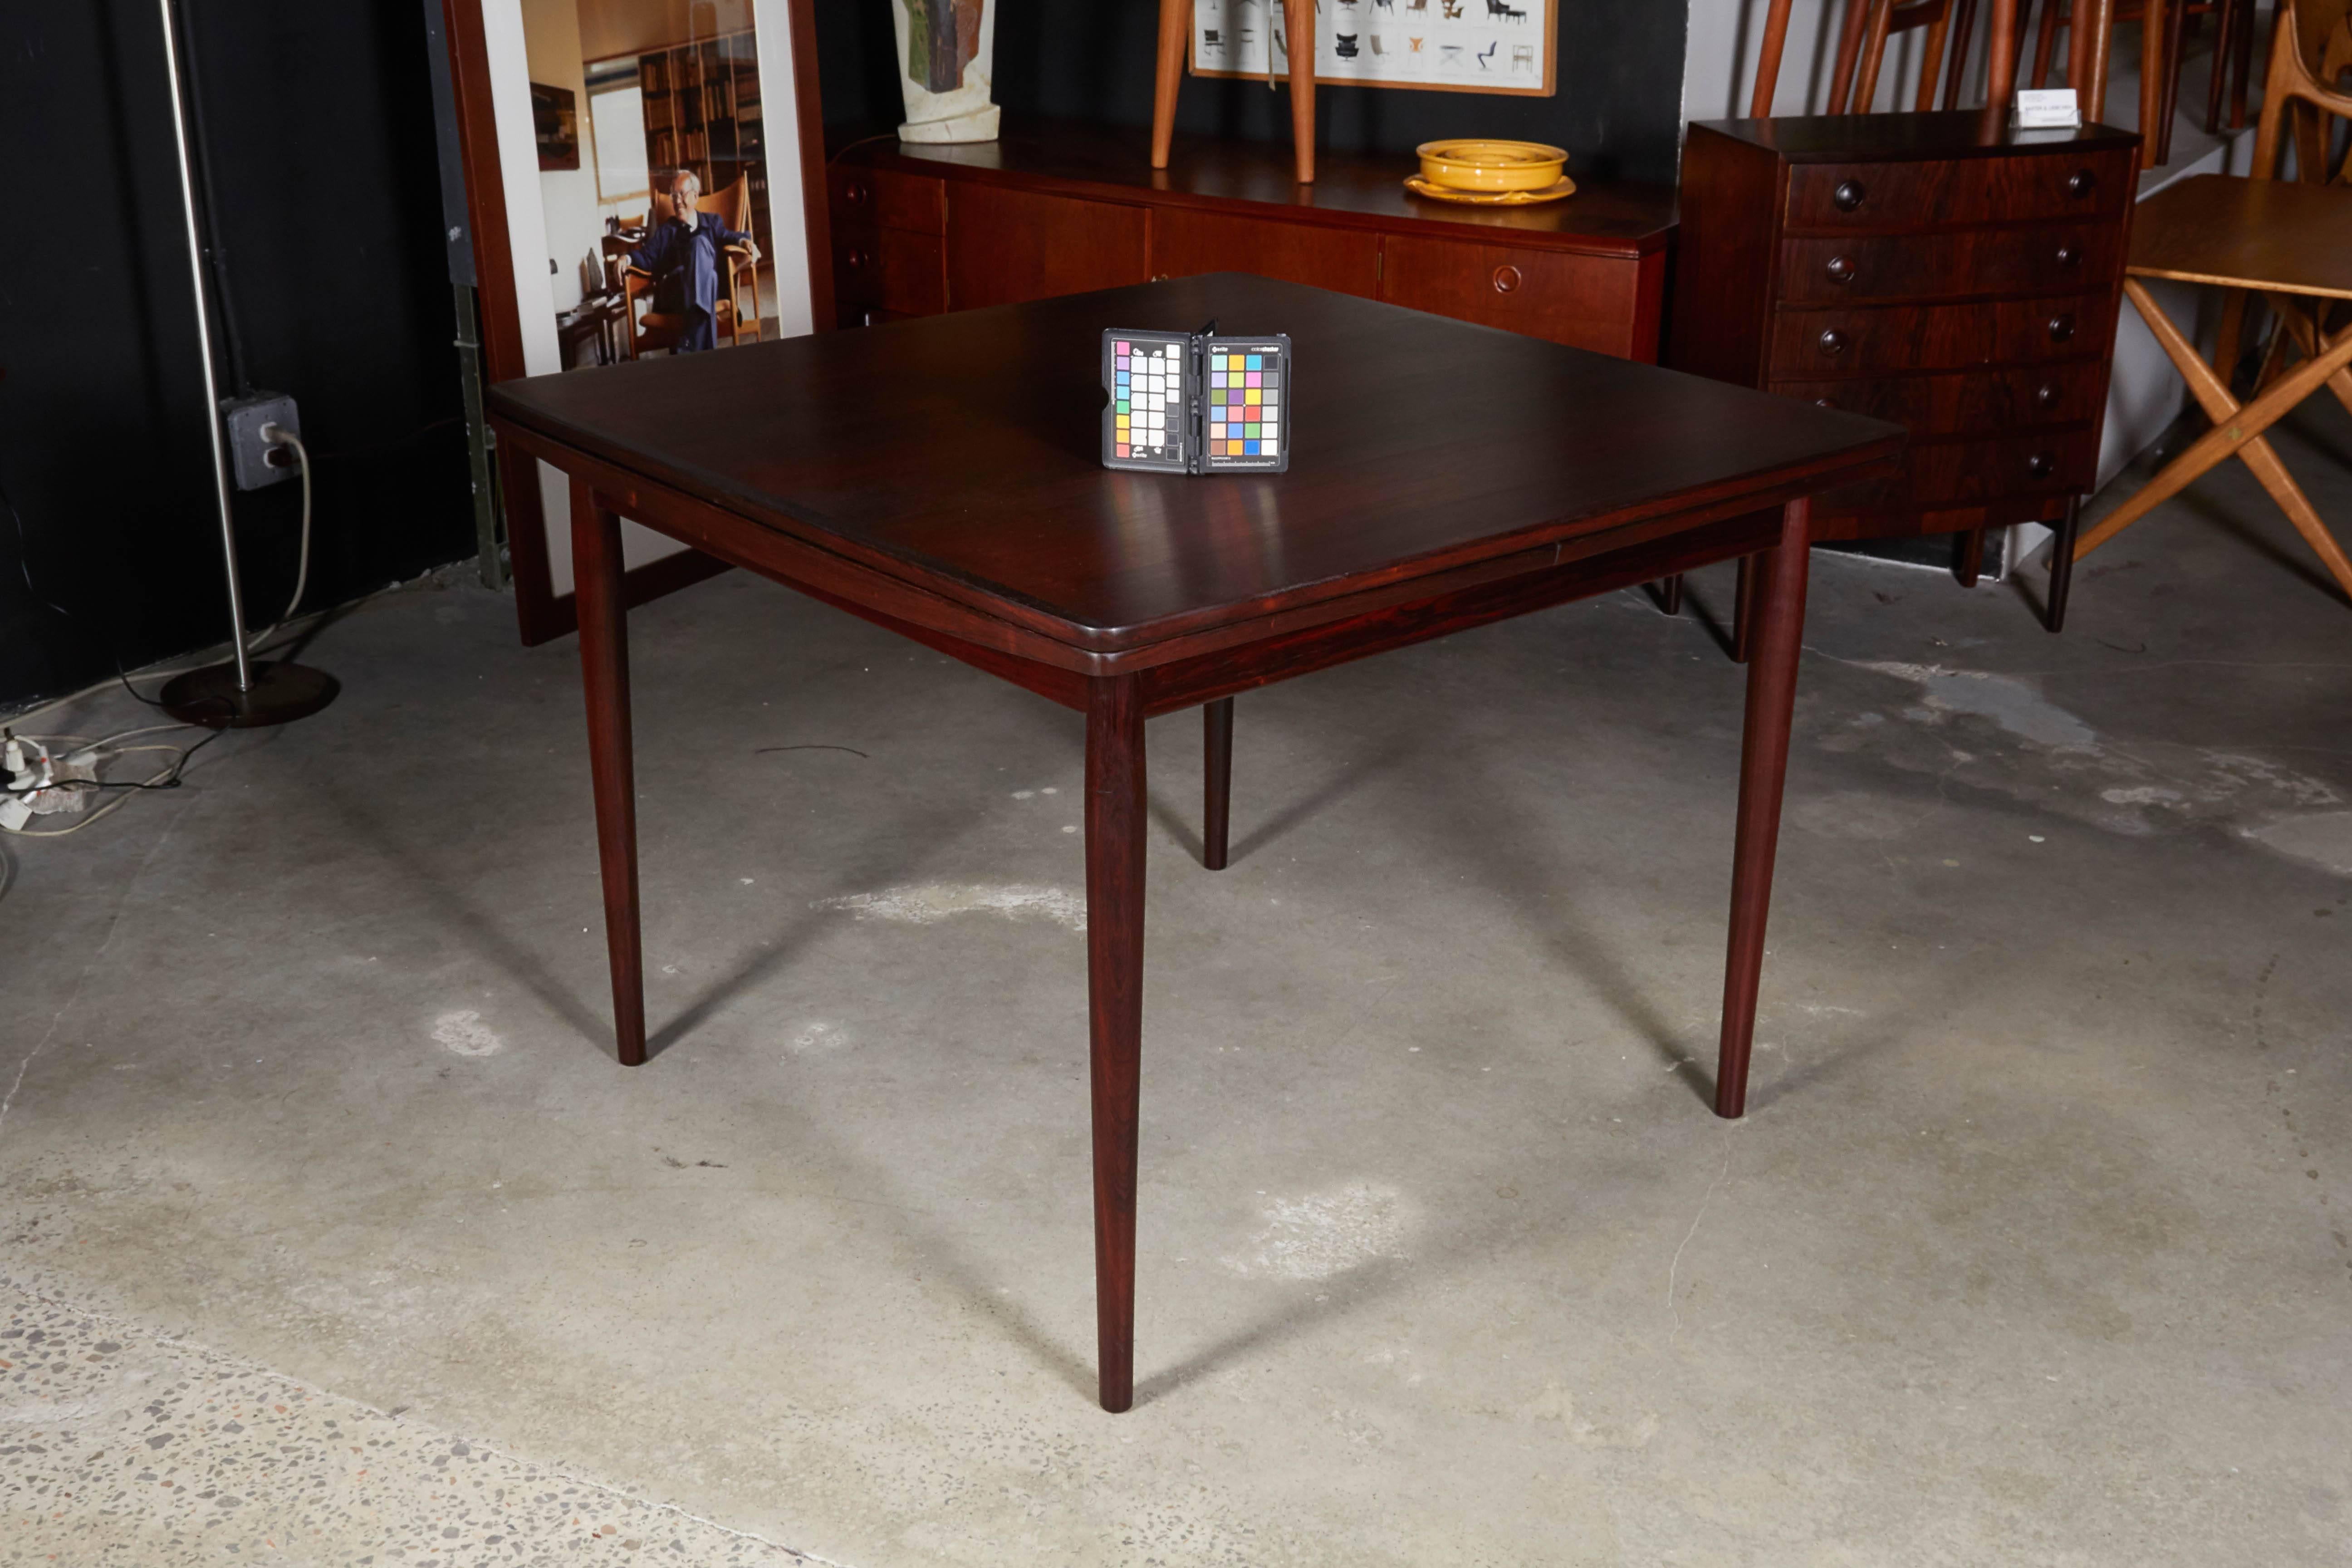 Vintage 1960s Kurt Ostervig Dining Table with 2 Leaves

This mid century dining table is in excellent condition and is one of the most beautiful I've seen in a long time. The leaves that pull out from under the table are large at 19"; seats 8